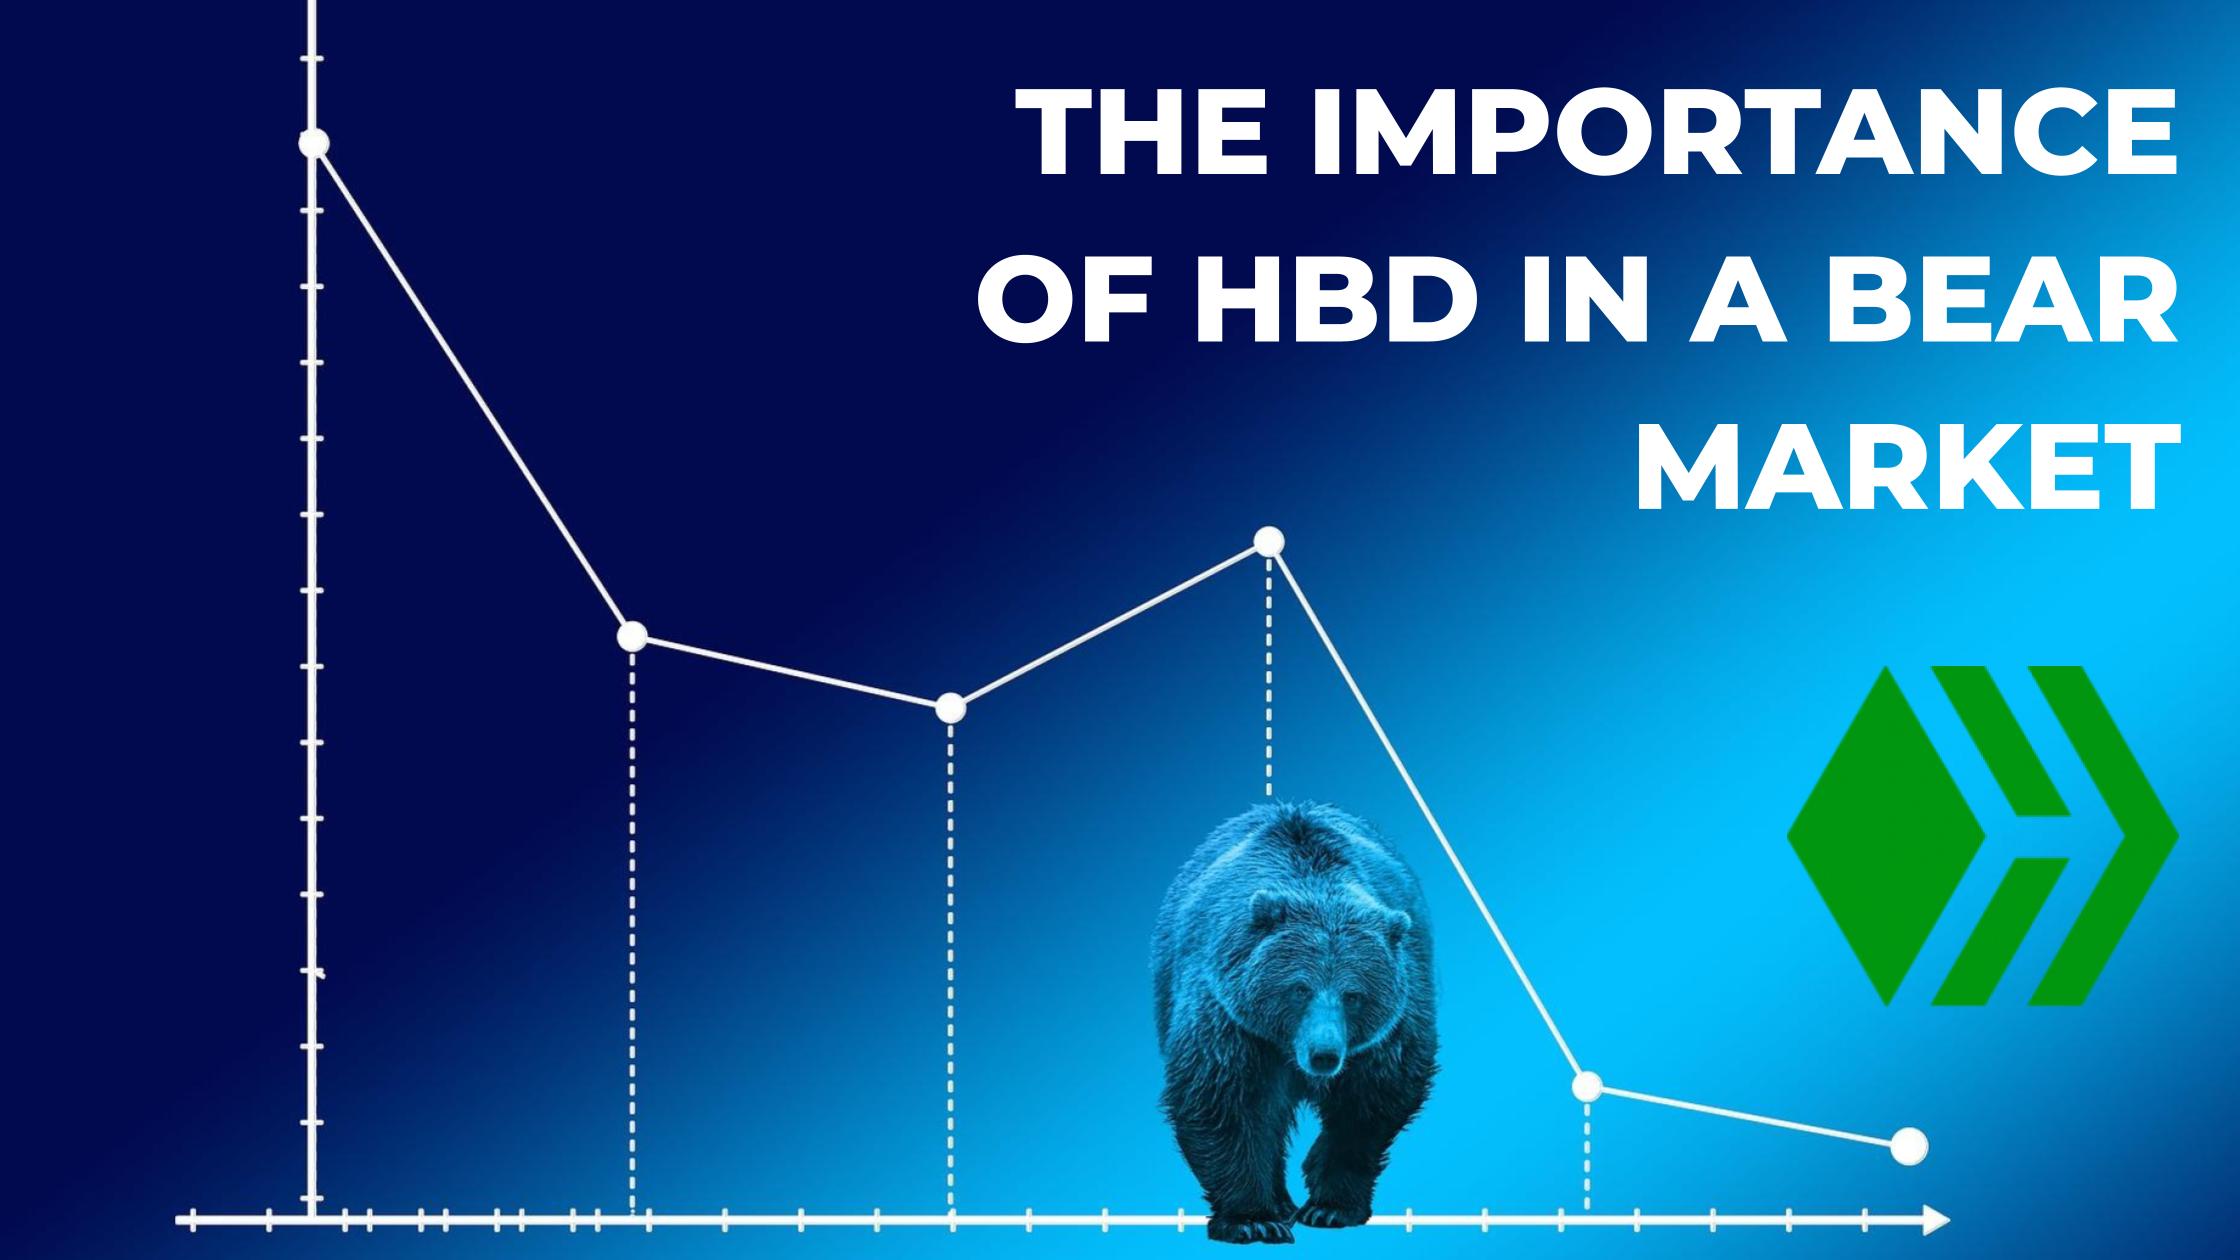 @tokenizedsociety/the-importance-of-hbd-in-a-bear-market